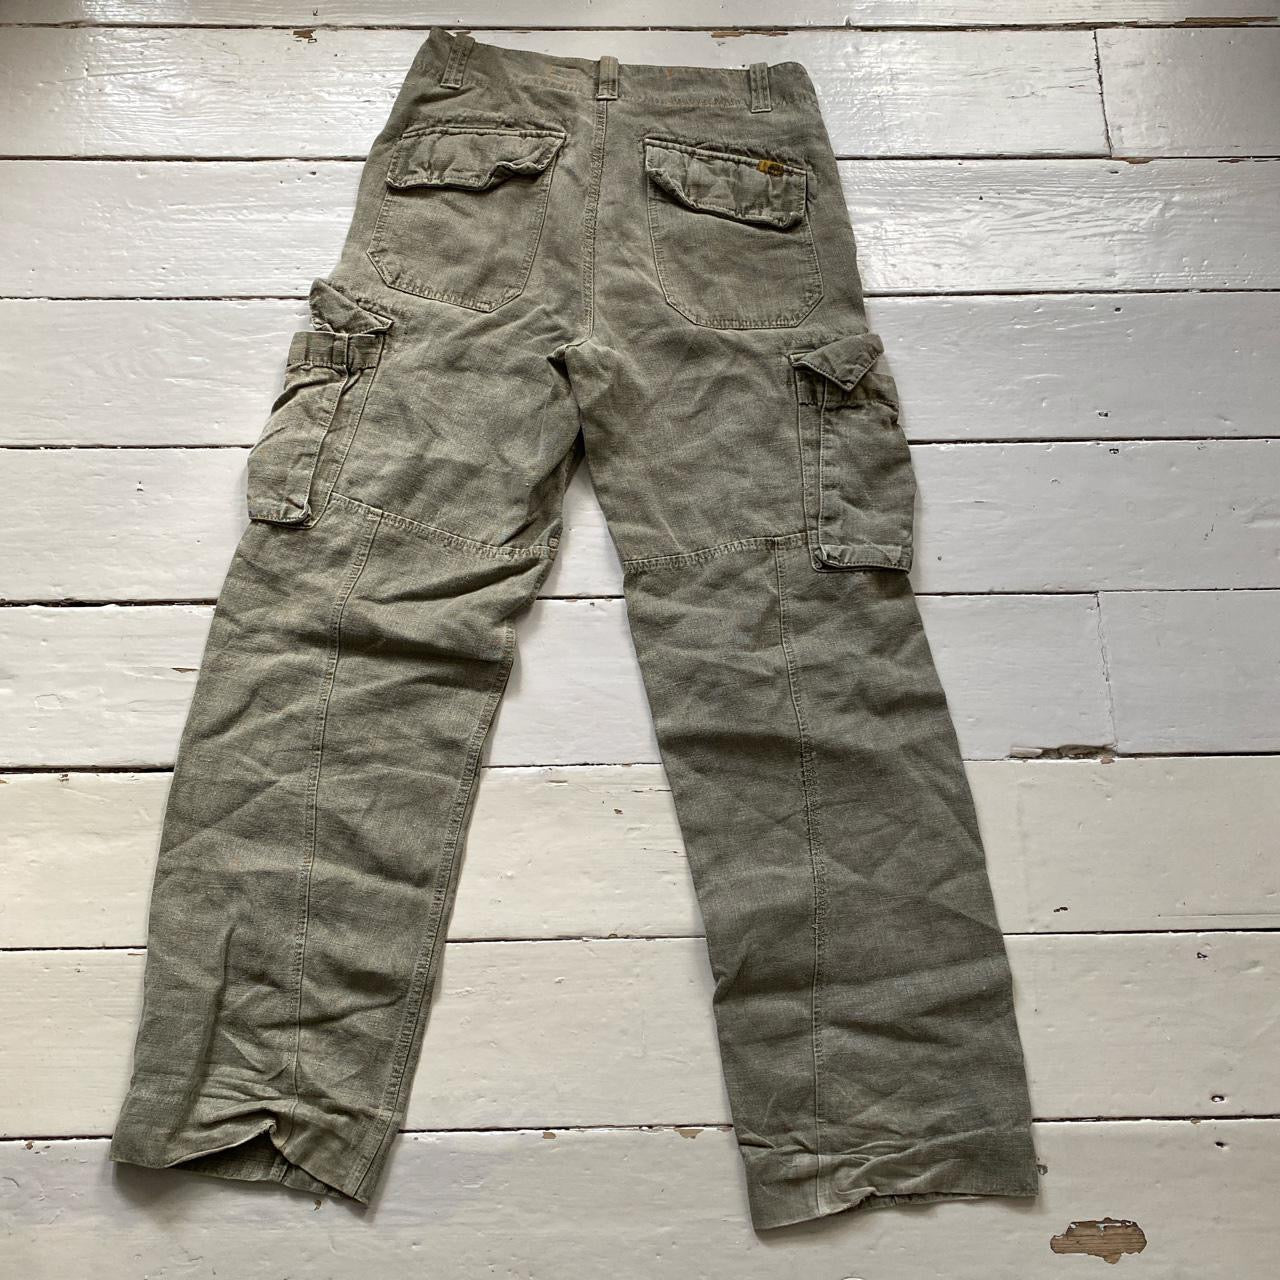 Timberland Olive Green Cargo Trousers (30/32)